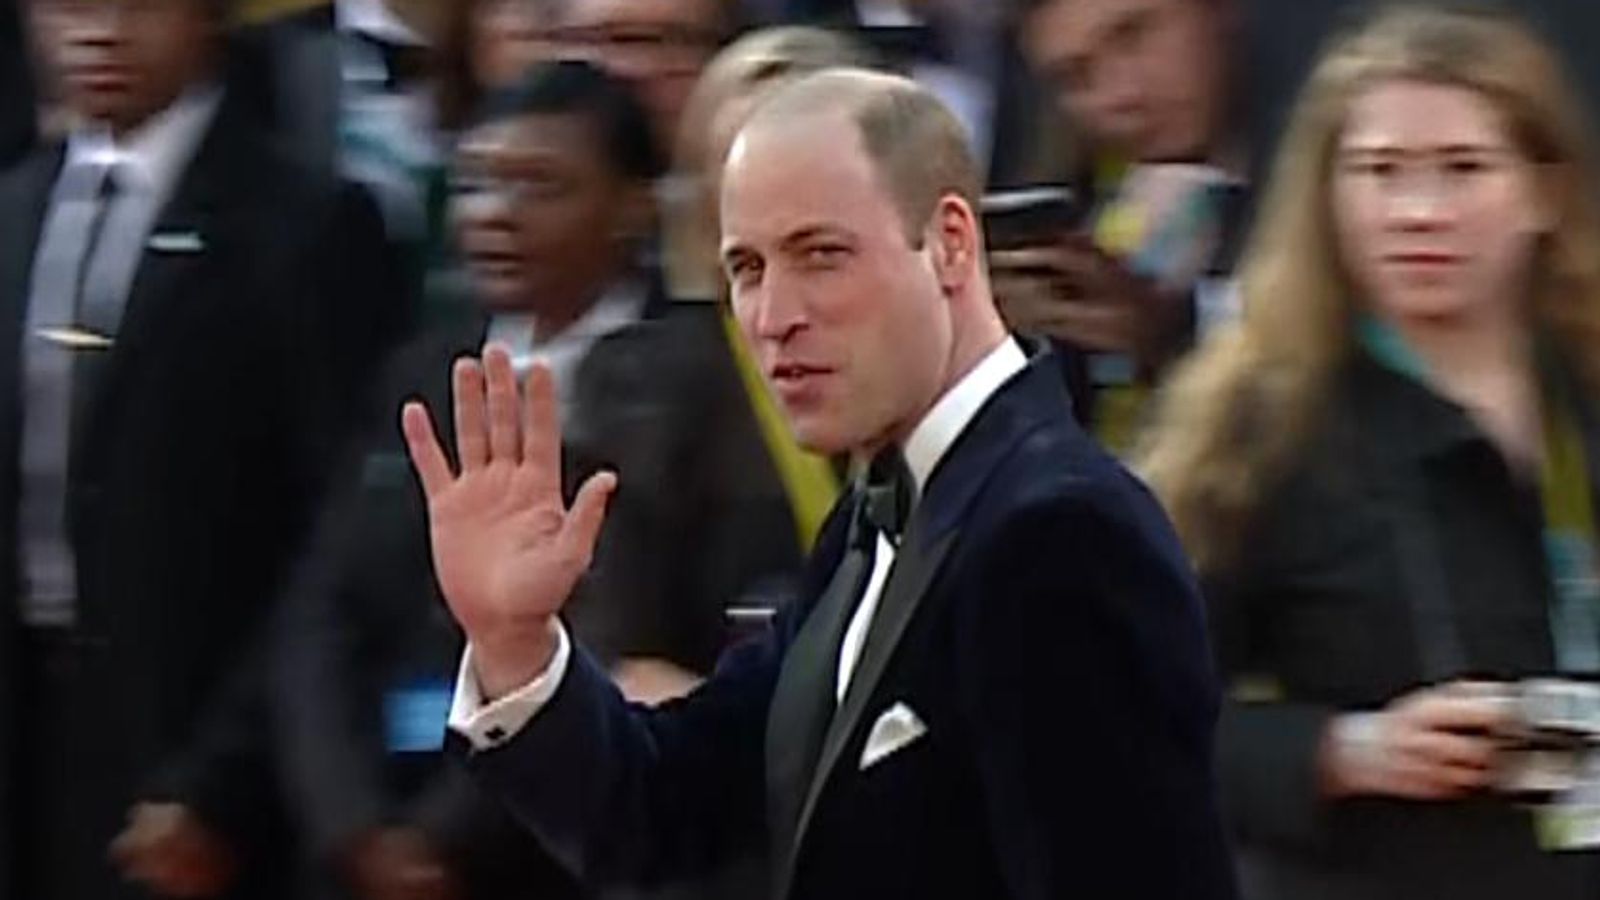 Prince William arrives at BAFTAs in Central London | Ents & Arts News ...